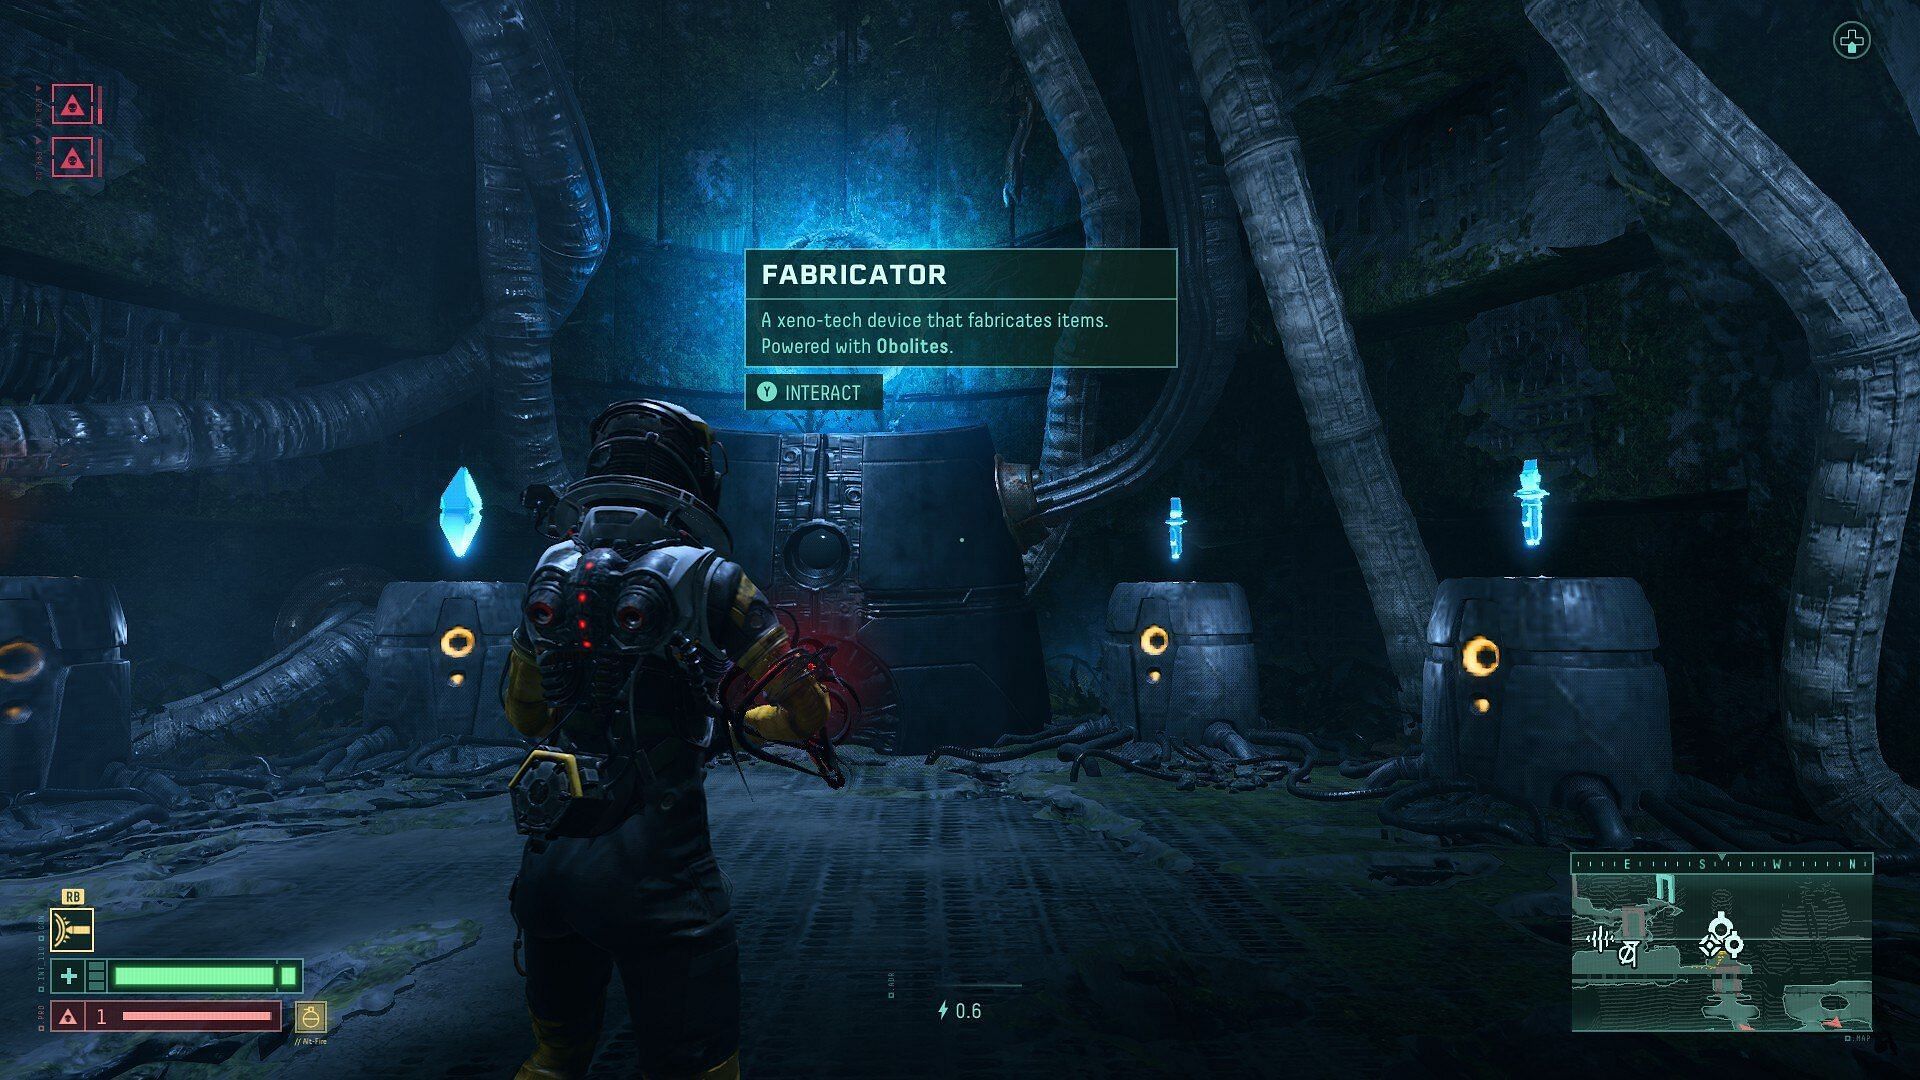 The Fabricator allows you to craft items using Obolites (Image via Housemarque, PlayStation)